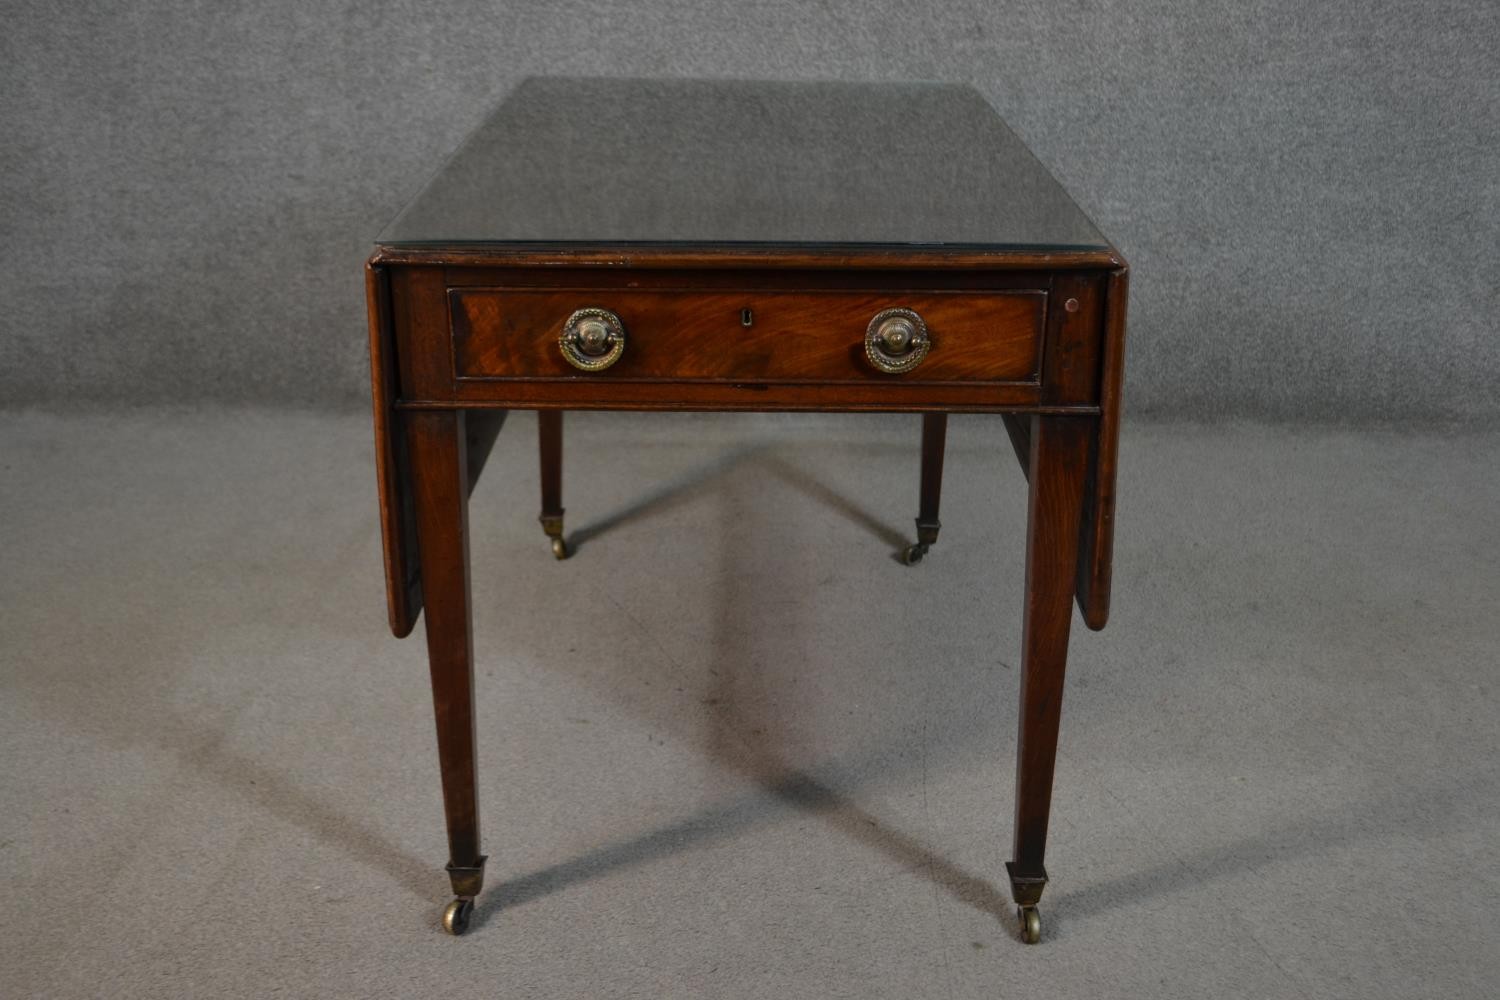 A 19th century mahogany Pembroke table, the top with drop leaves and a moulded edge, over two end